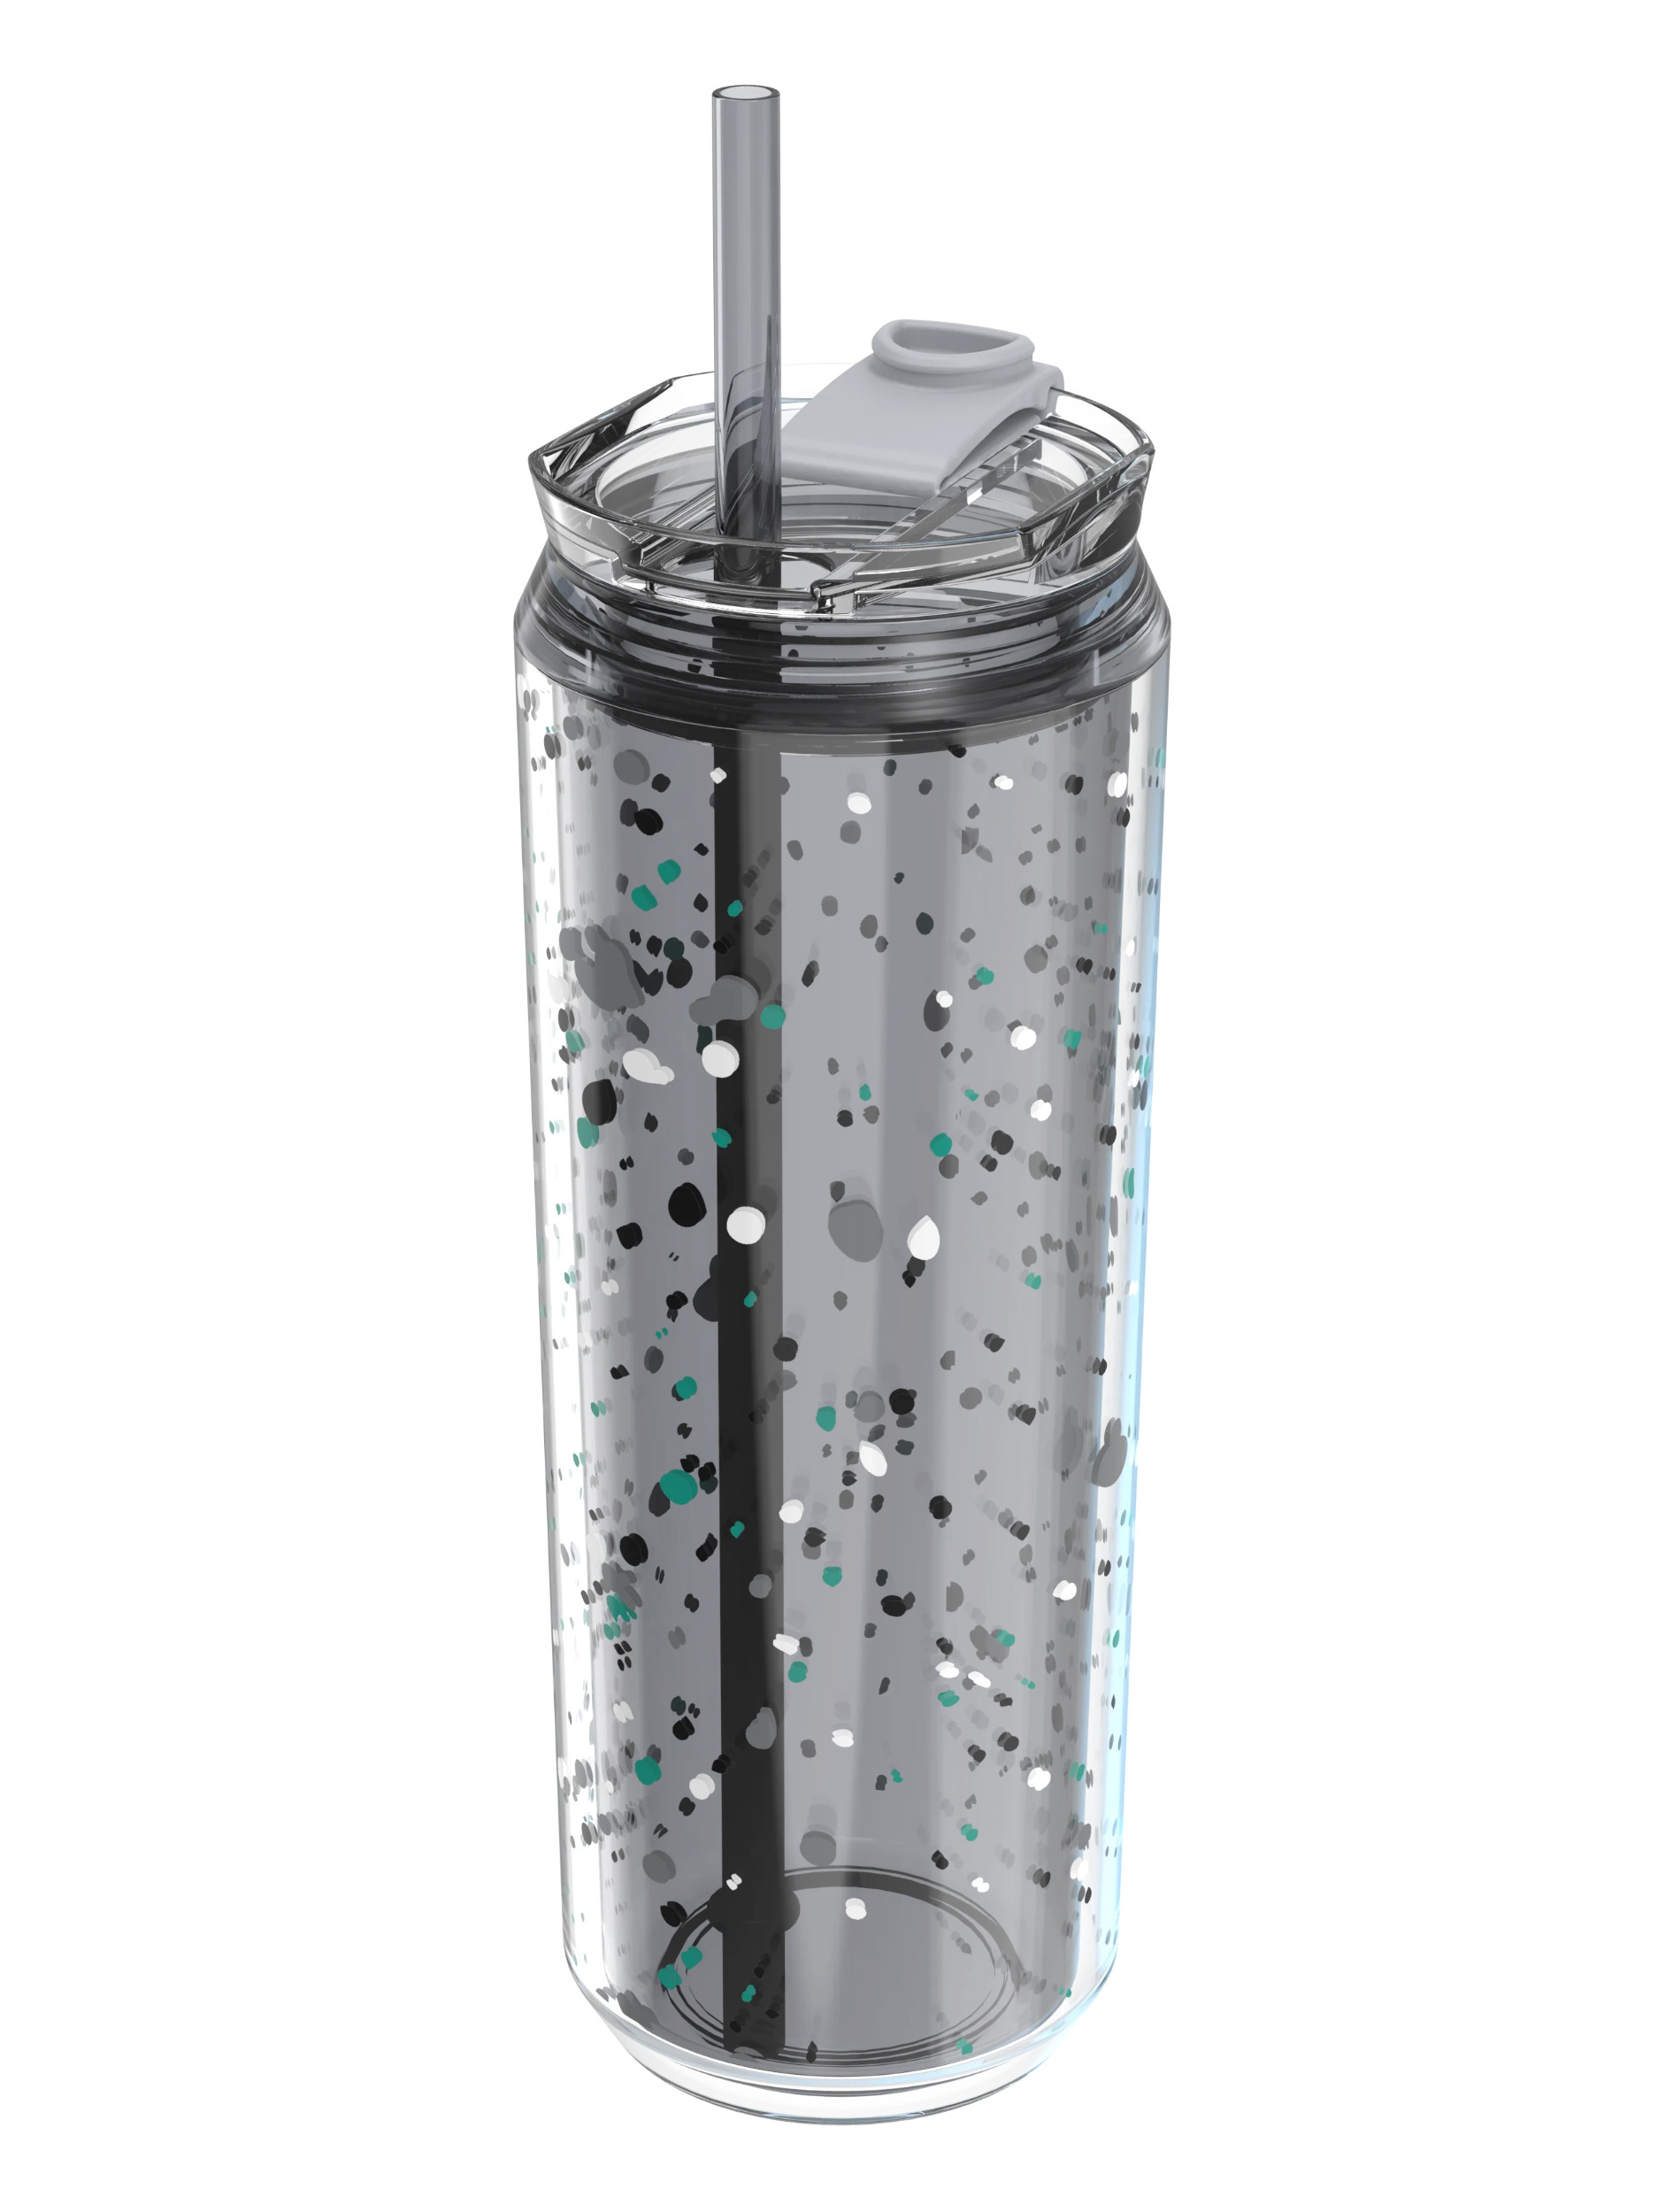 Cool Gear 3-Pack Modern Tumbler with Reusable Straw | Dishwasher Safe, Cup Holder Friendly, Spillproof, Double-Wall Insulated Travel Tumbler | Printed Variety Pack - image 4 of 4